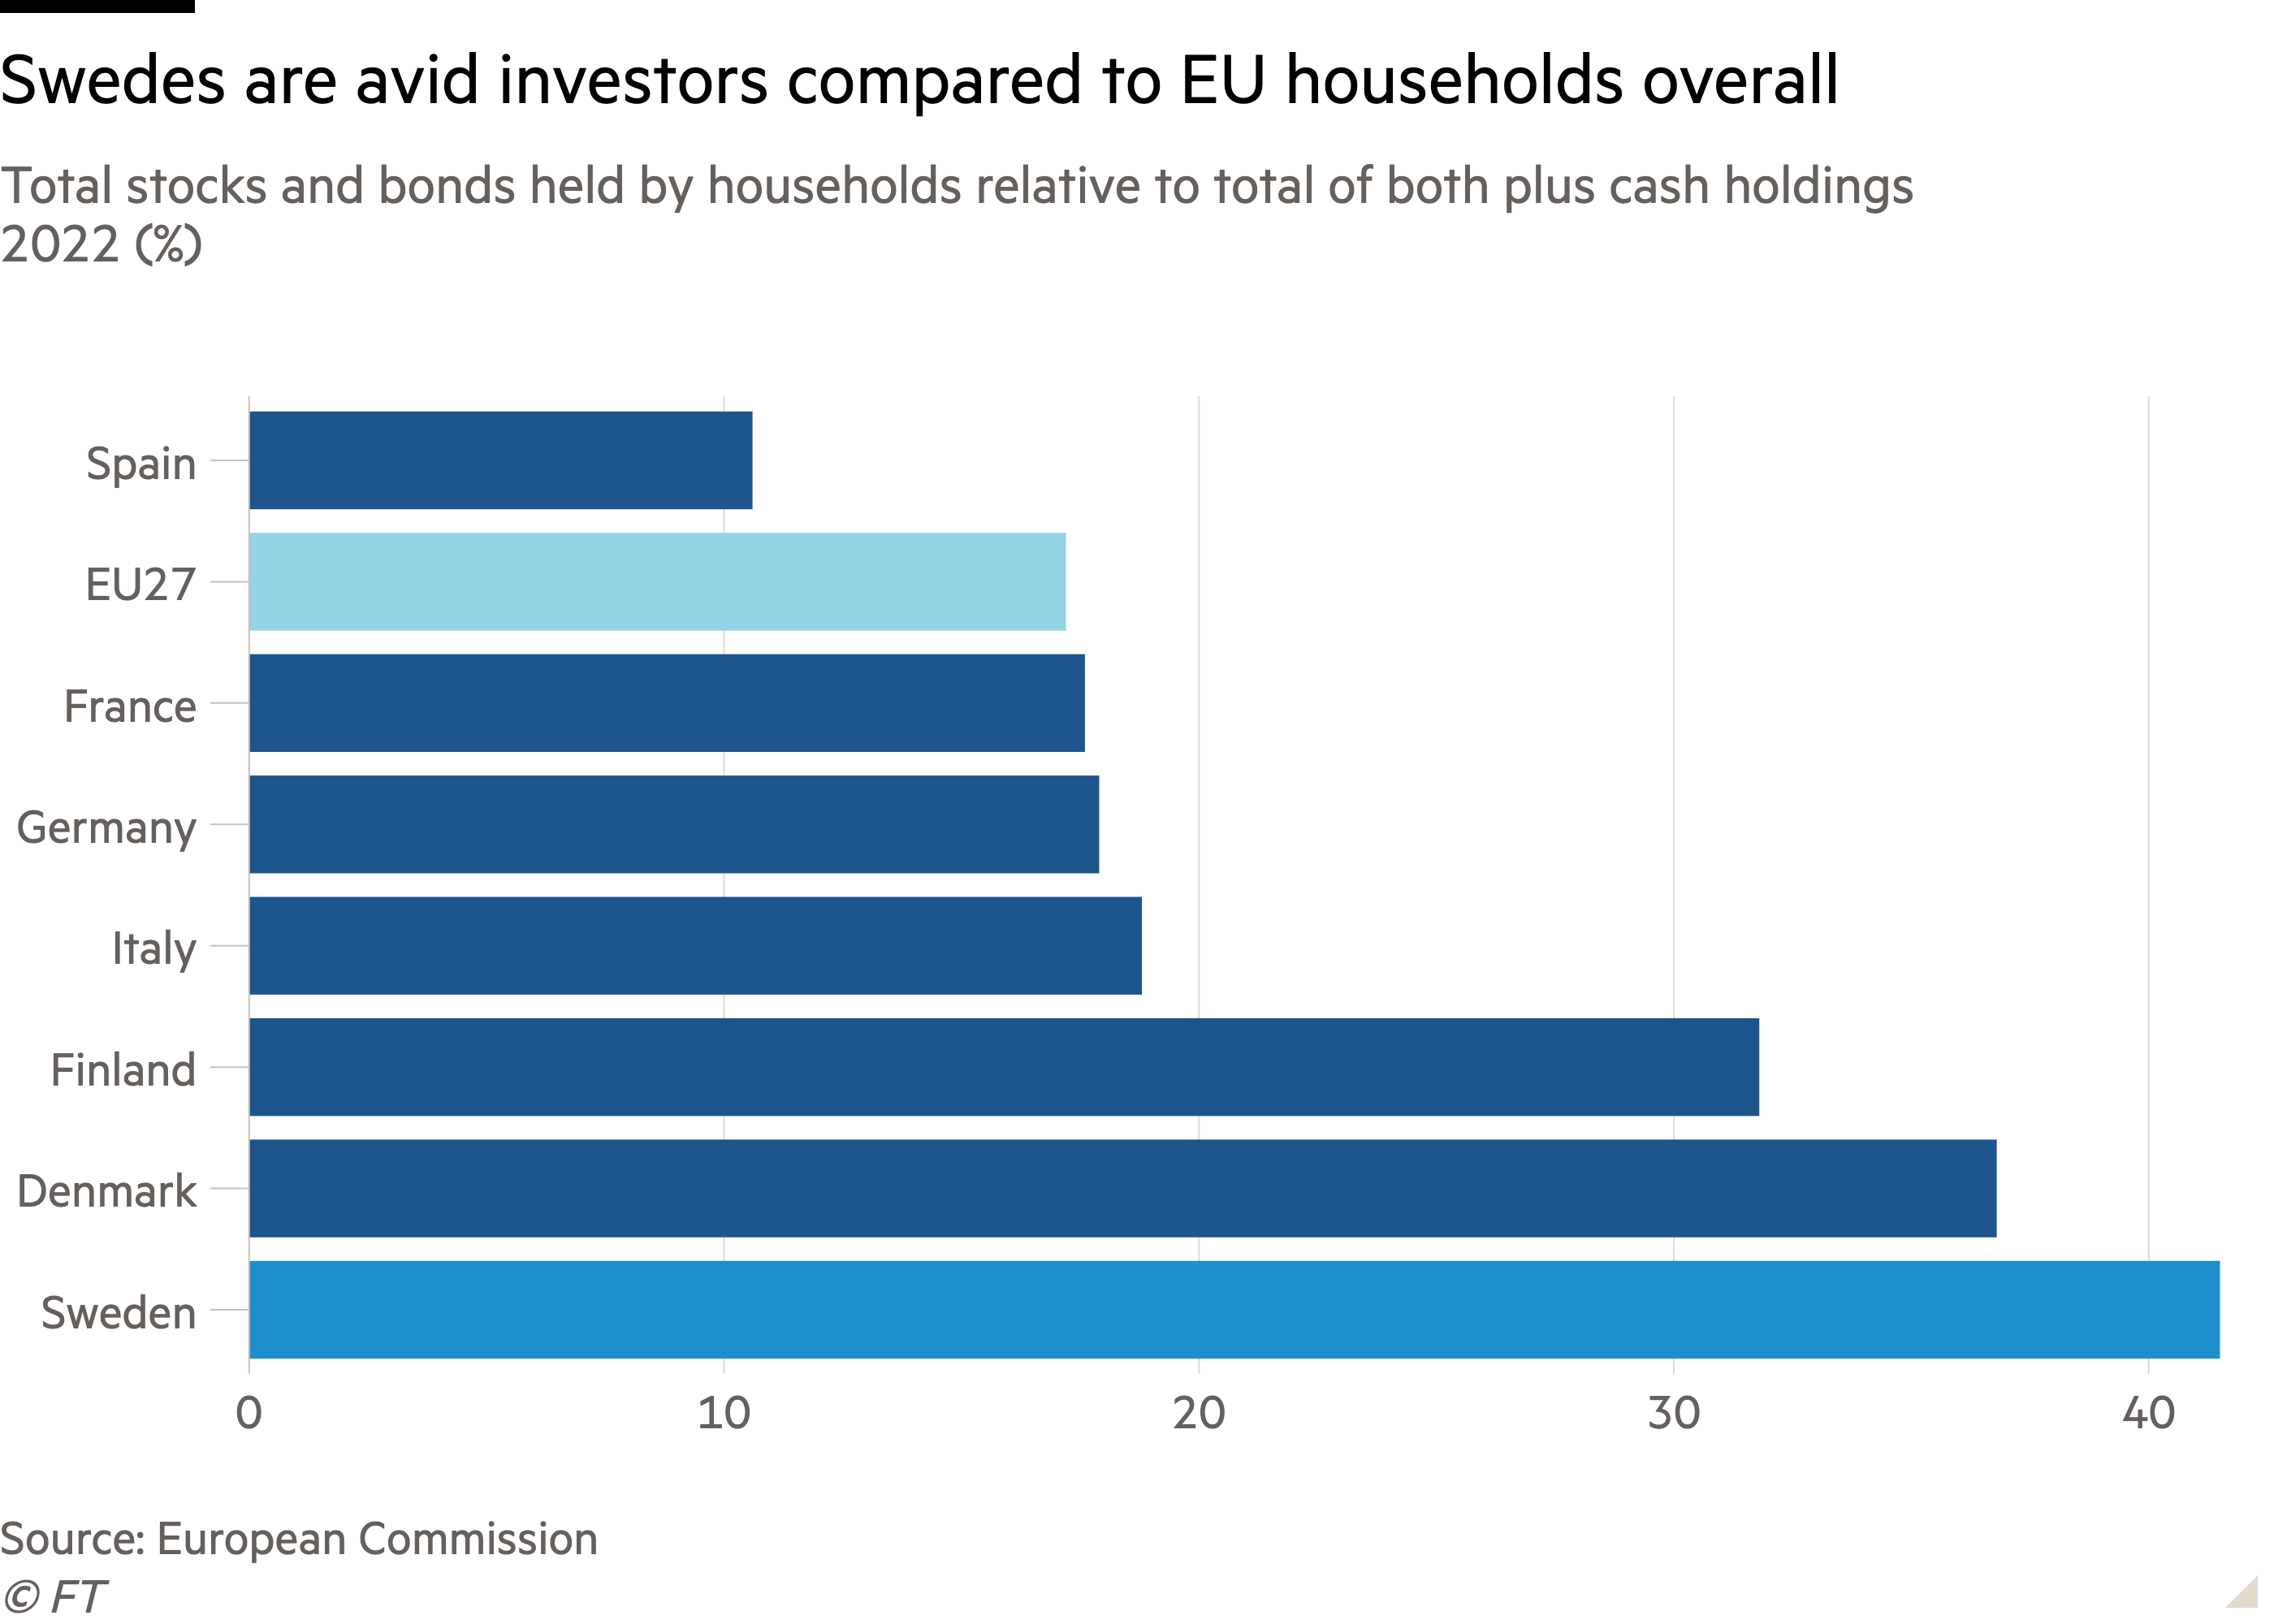 Bar chart of Total stocks and bonds held by households relative to total of both plus cash holdings 2022 (%) showing Swedes are avid investors compared to EU households overall